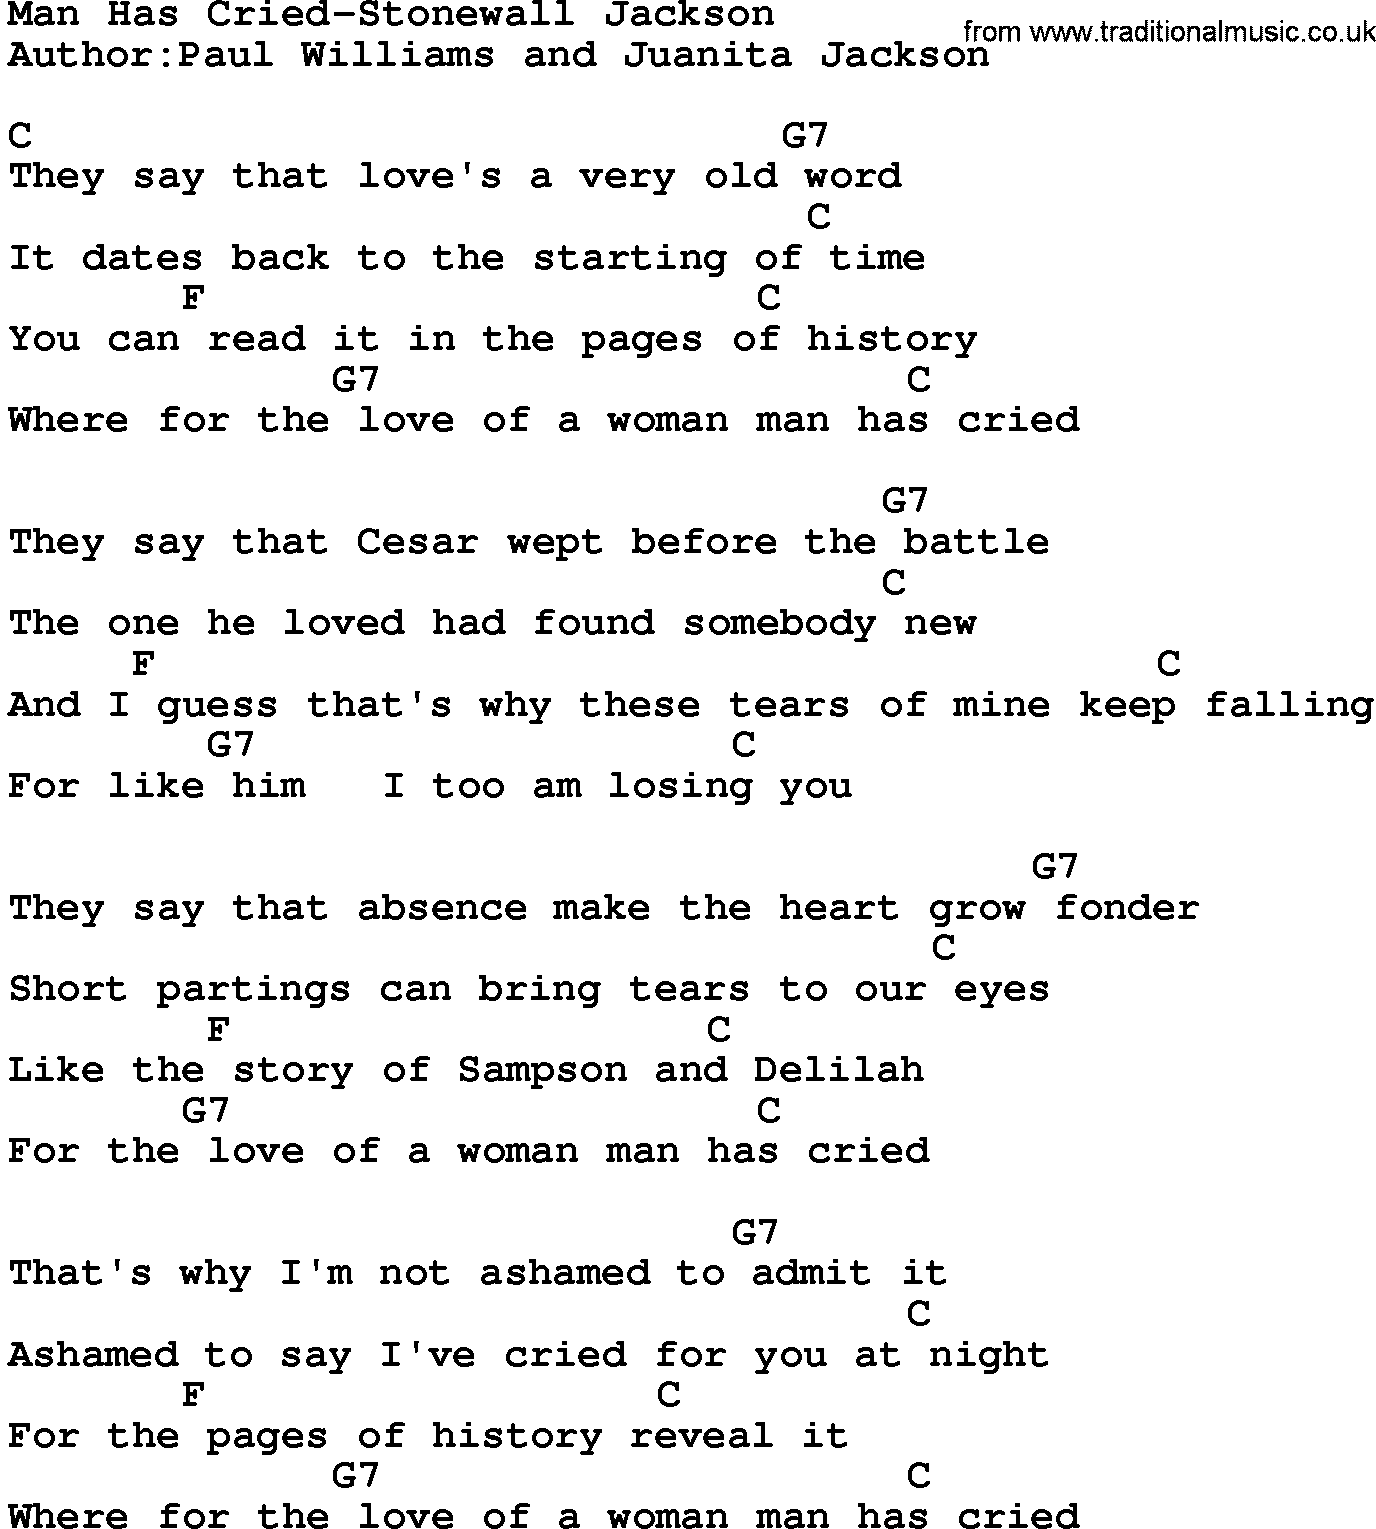 Country music song: Man Has Cried-Stonewall Jackson lyrics and chords